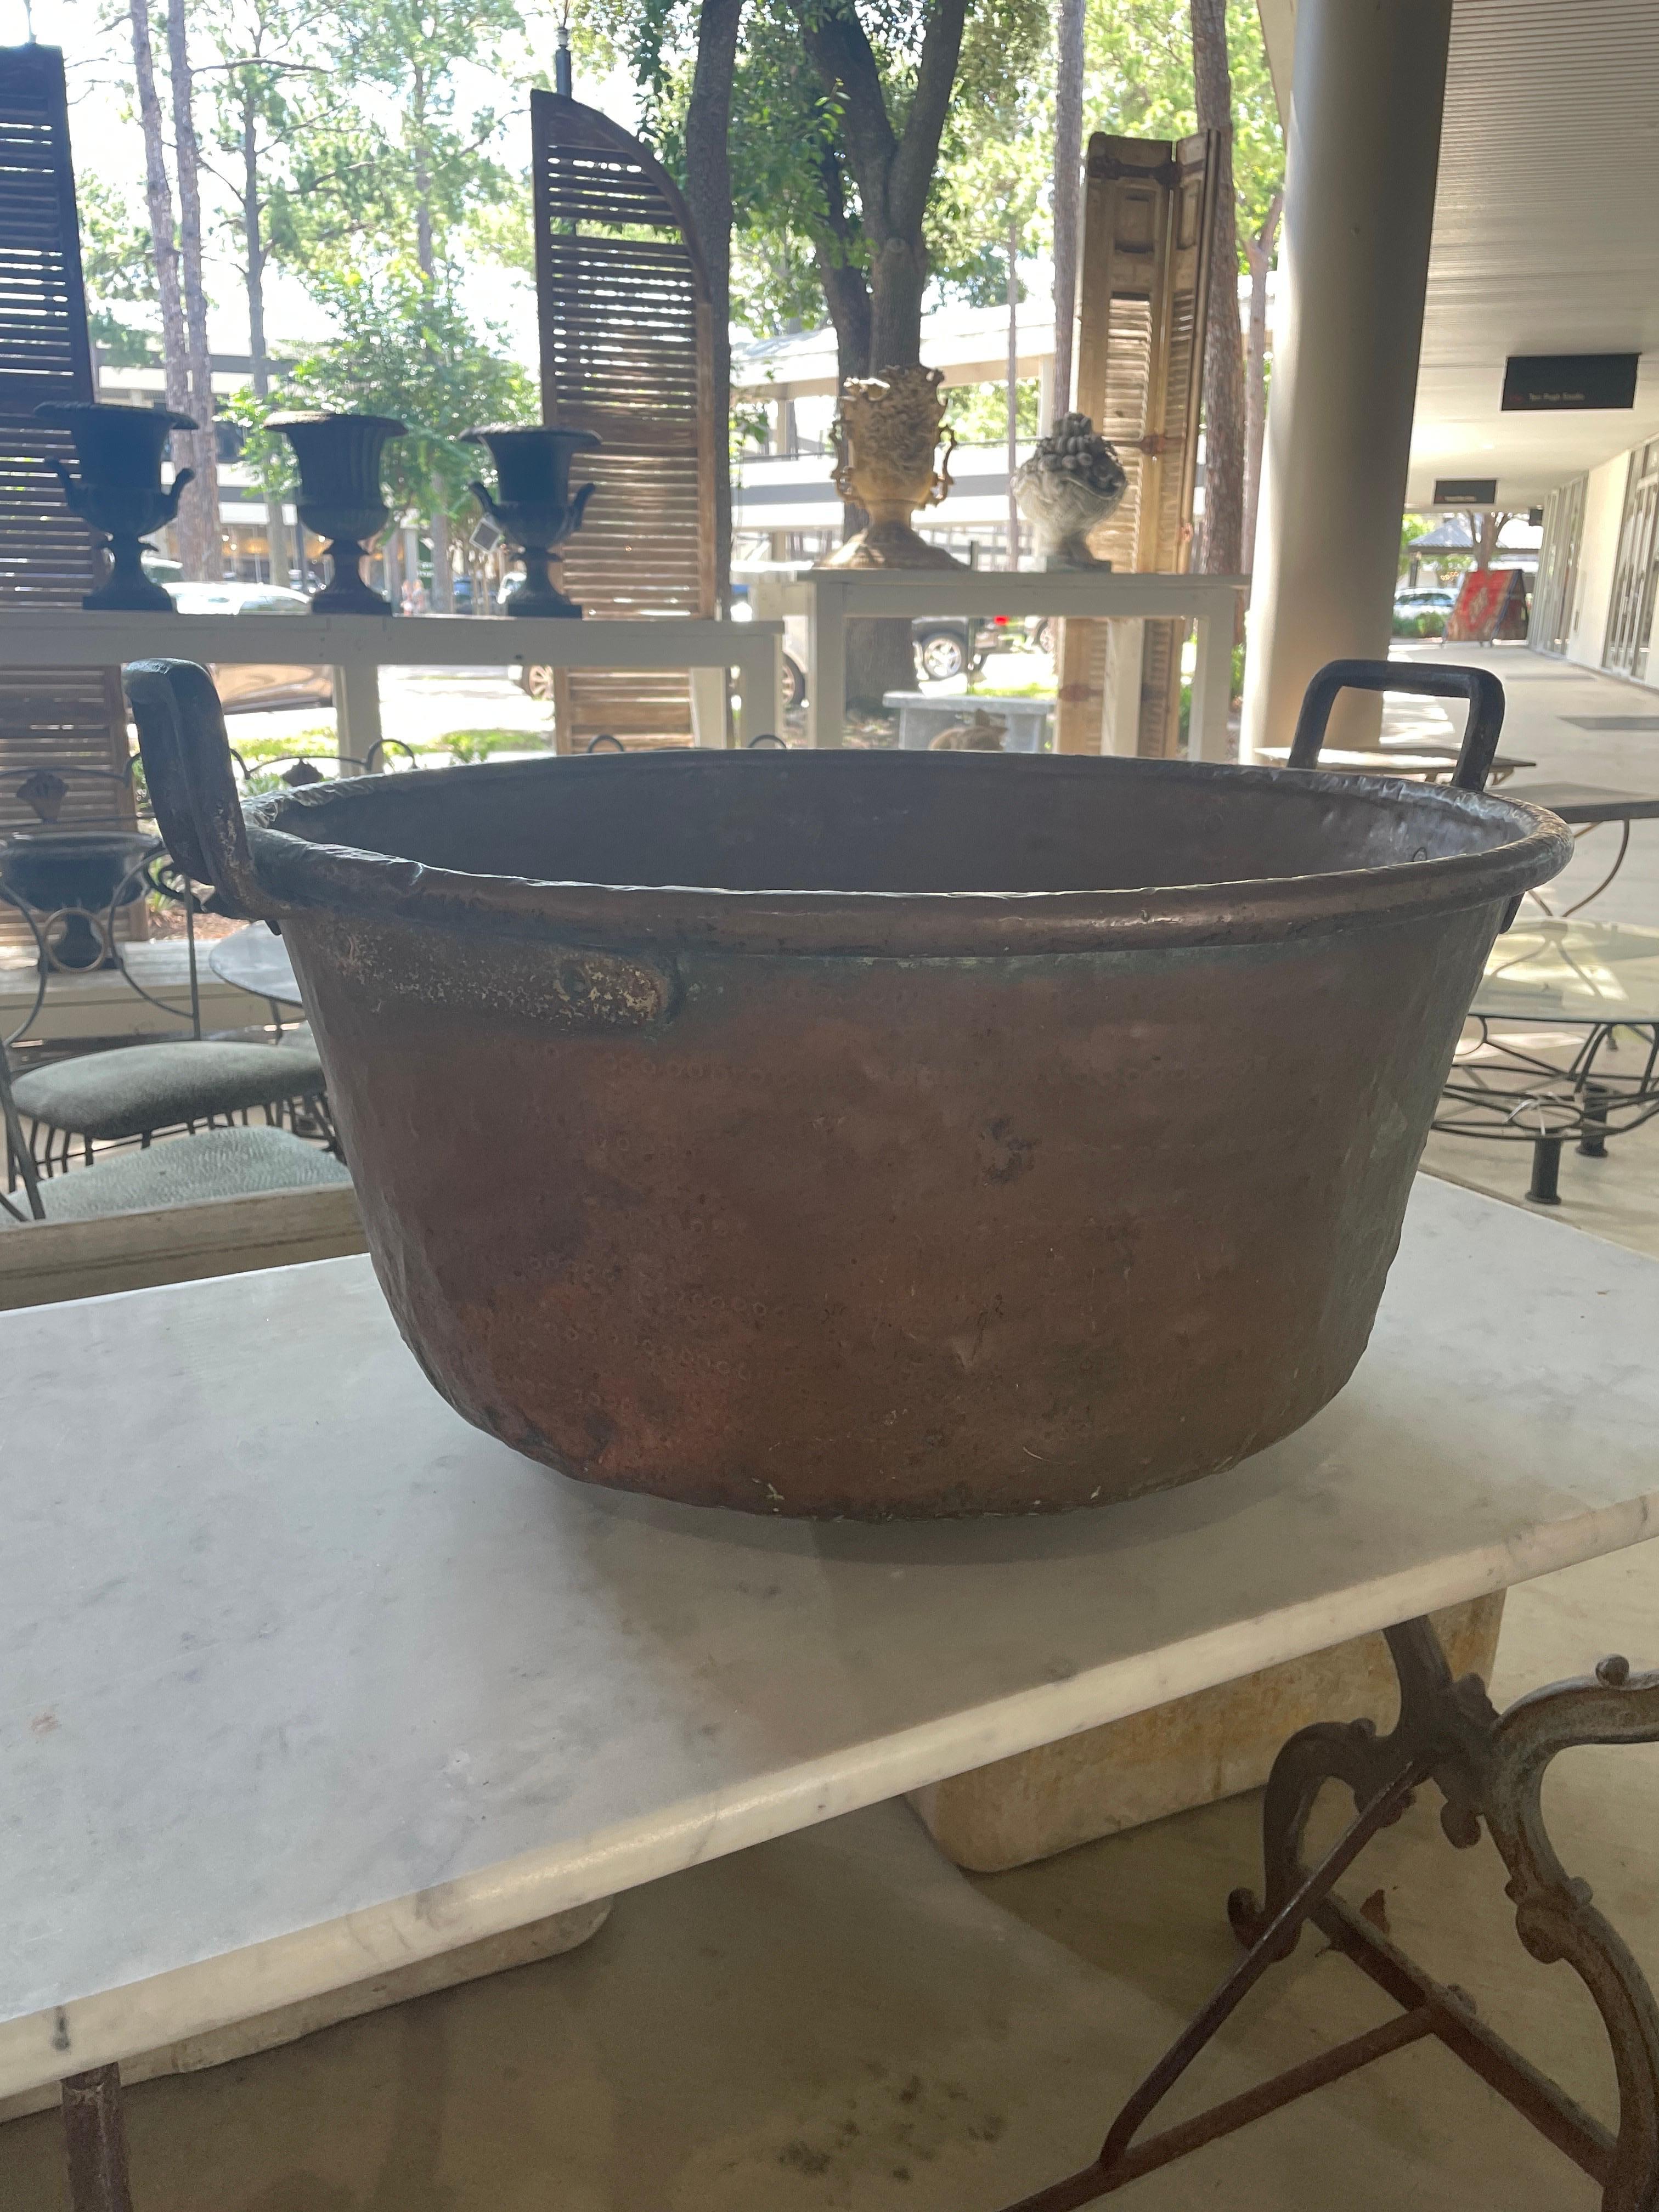 This antique copper mixing bowl is a timeless piece that exudes both elegance and functionality. Crafted decades ago by skilled artisans, its rich, burnished surface tells the tale of years of culinary creativity. With a generous capacity, it stands